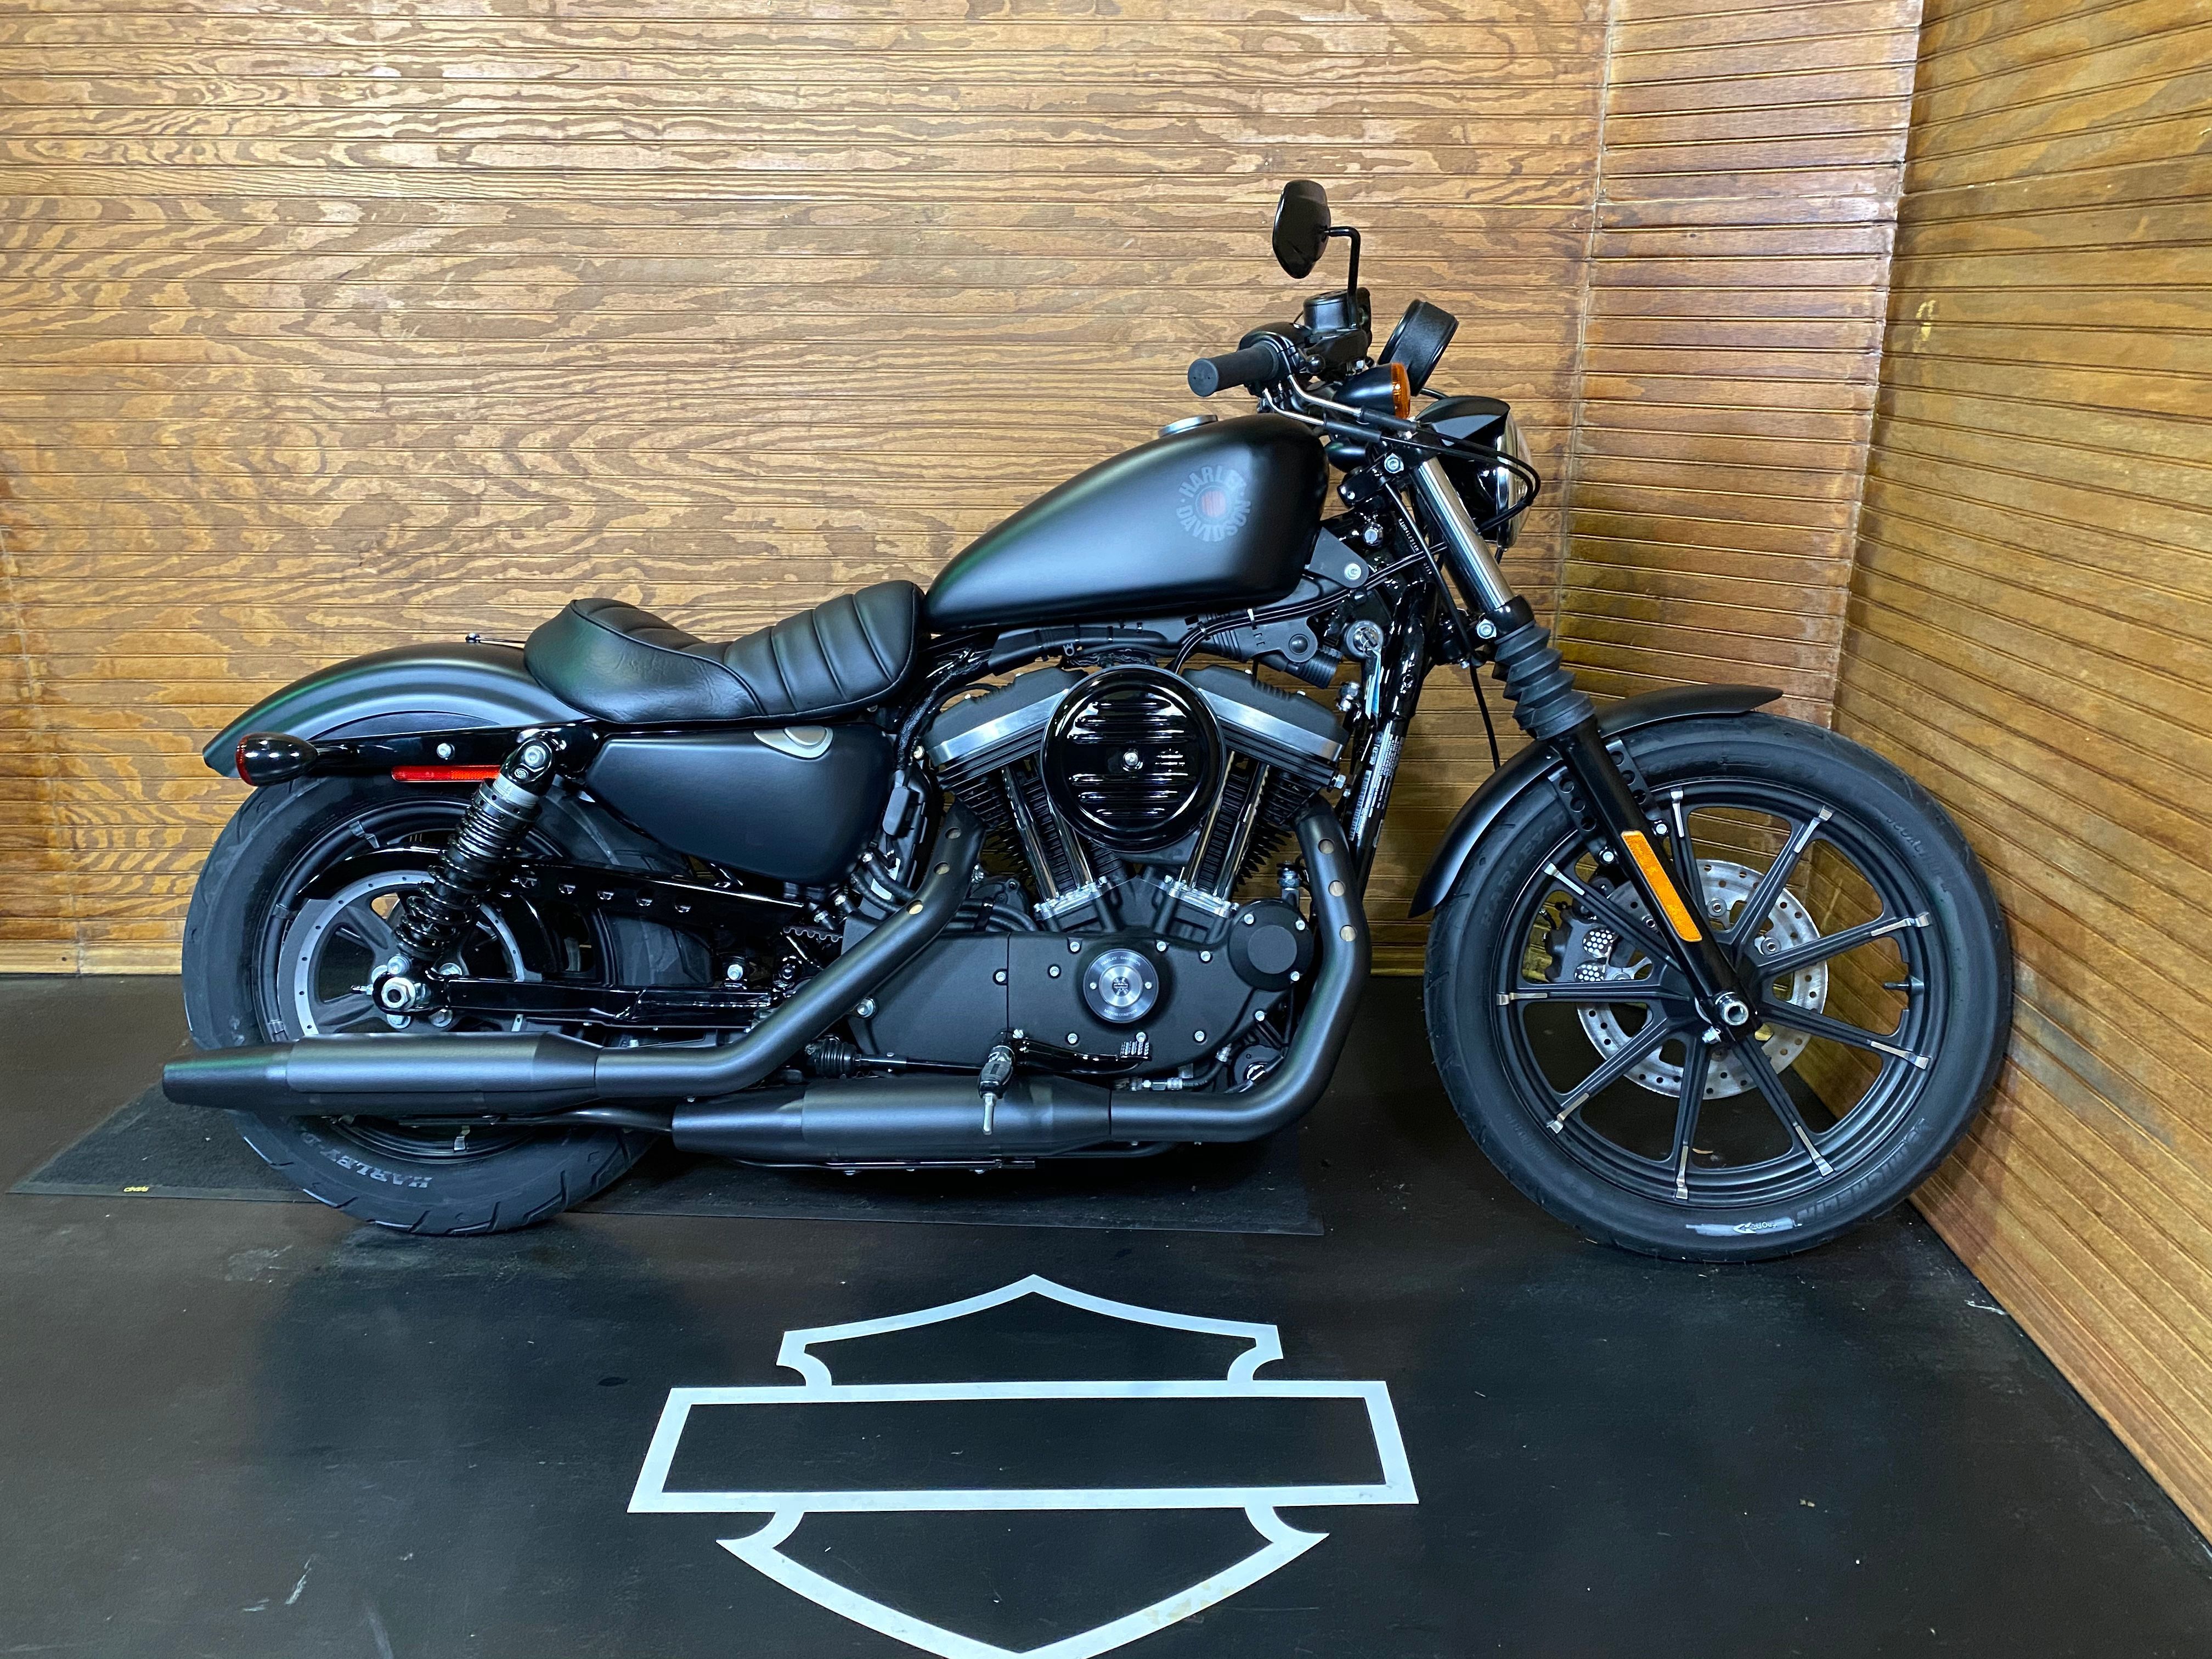 Blue 2021 Harley-Davidson Iron 883 (1)- Harley-Davidson in front of wooden wall